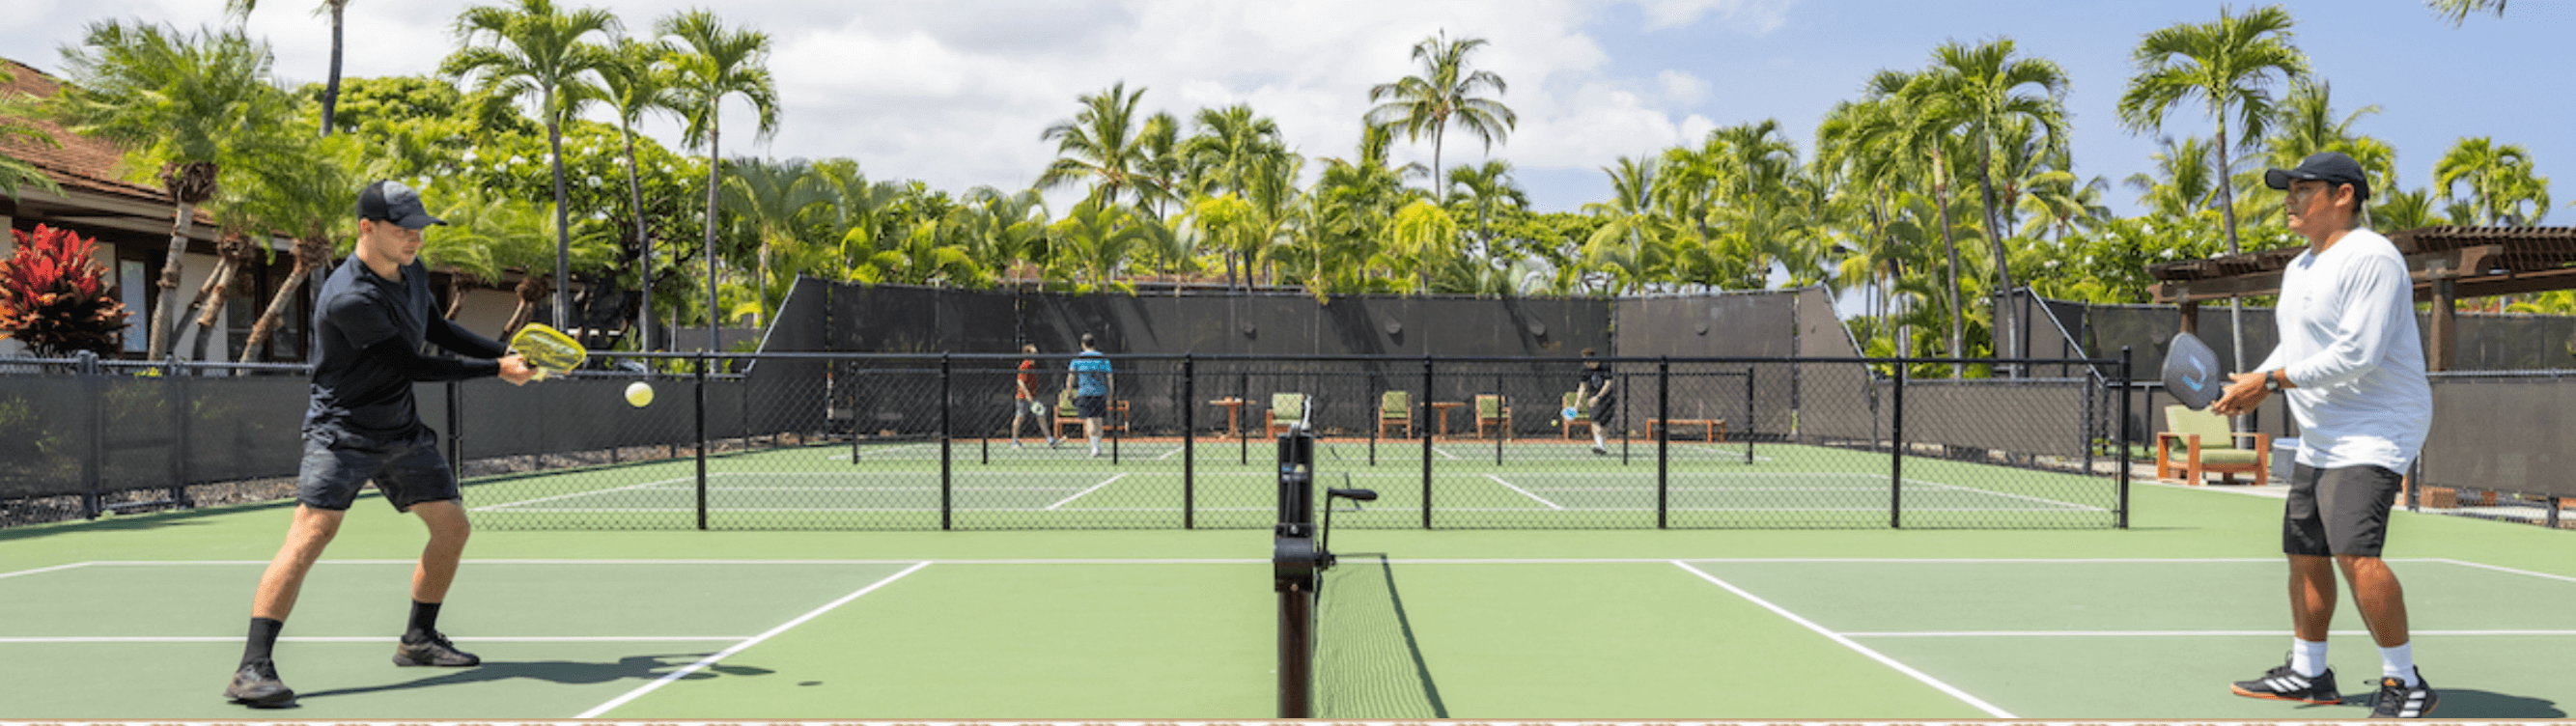 tropical beaches, pickleball courts, relaxing vacation in paradise